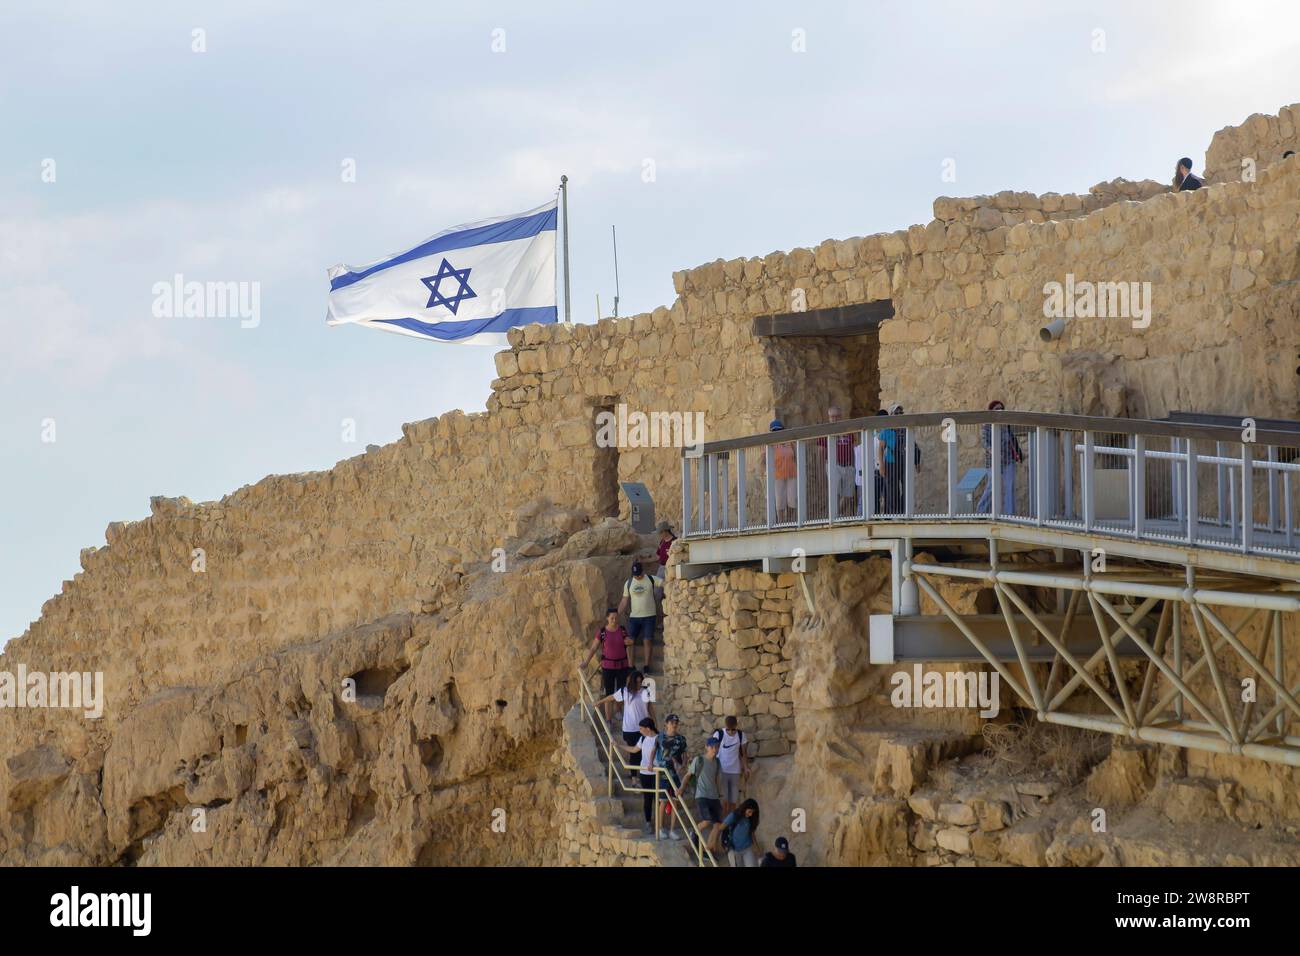 November 2022, The israeli flag flies proudly as tourists visit Massada, built by Herod the Great, and the ancient site of Jewish revolt against the R Stock Photo